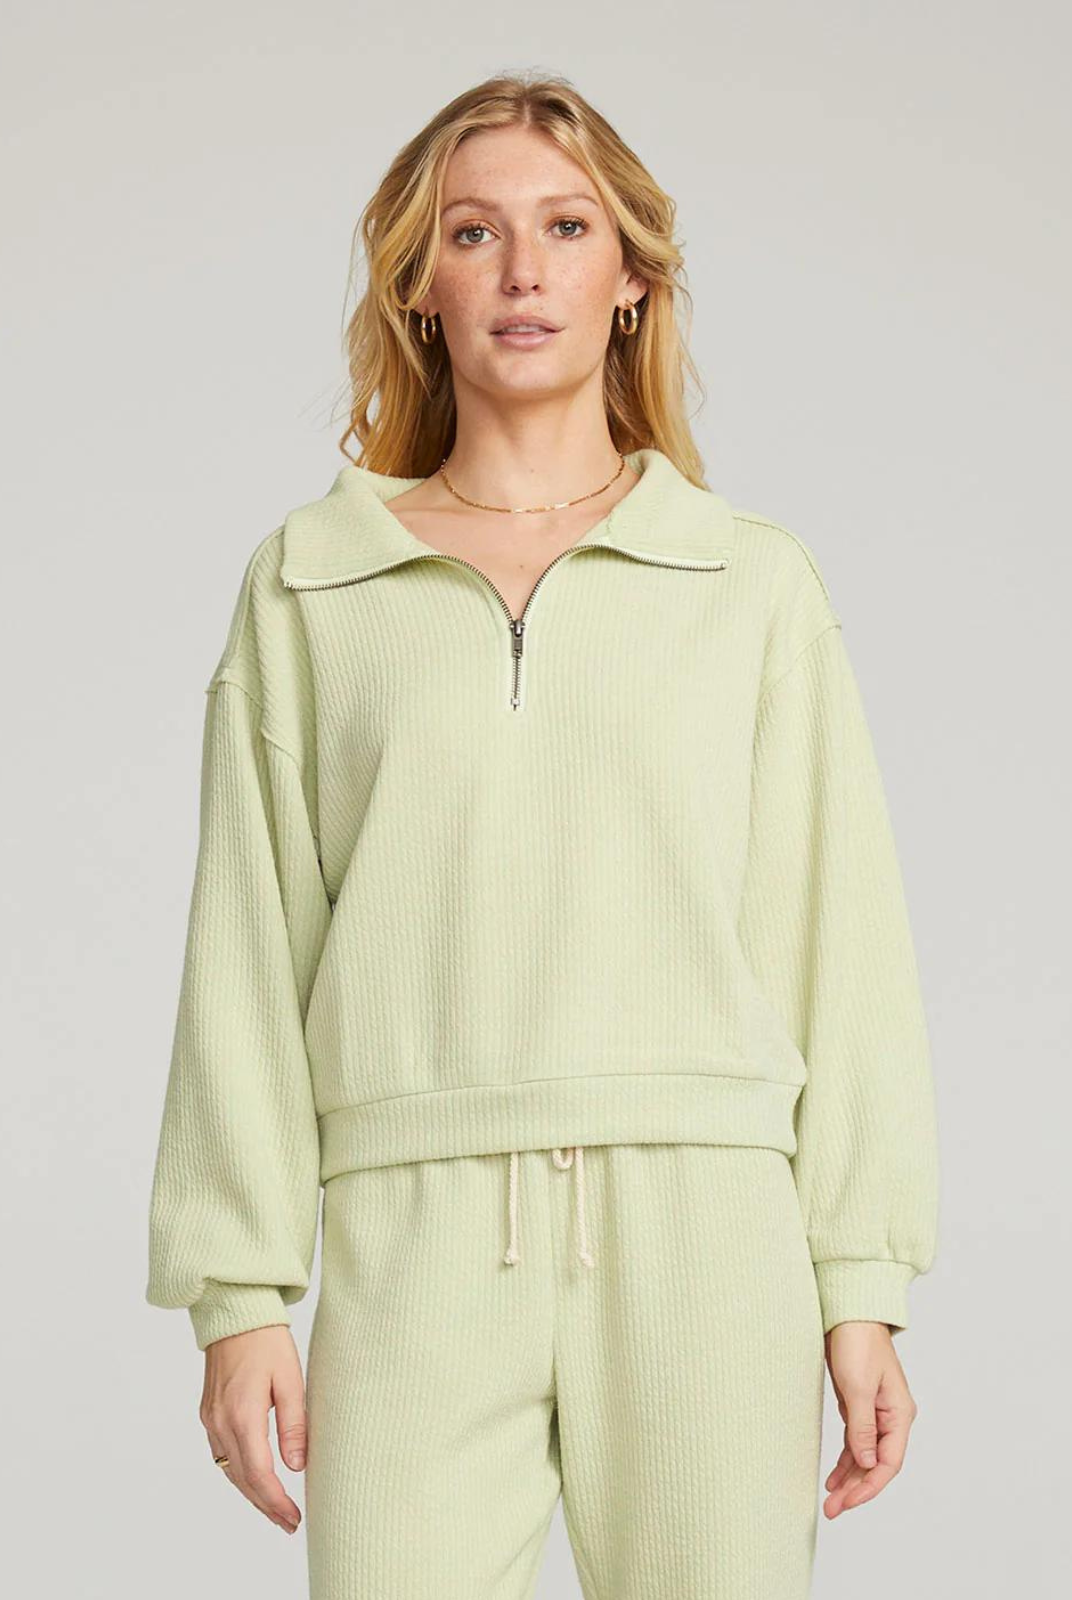 Saltwater Luxe Half Zip Pullover - Limelight. Liven up your spring wardrobe with a burst of color in our limelight Half Zip Pullover. Crafted in a vivid green hue, this piece perfectly blends comfort with style.